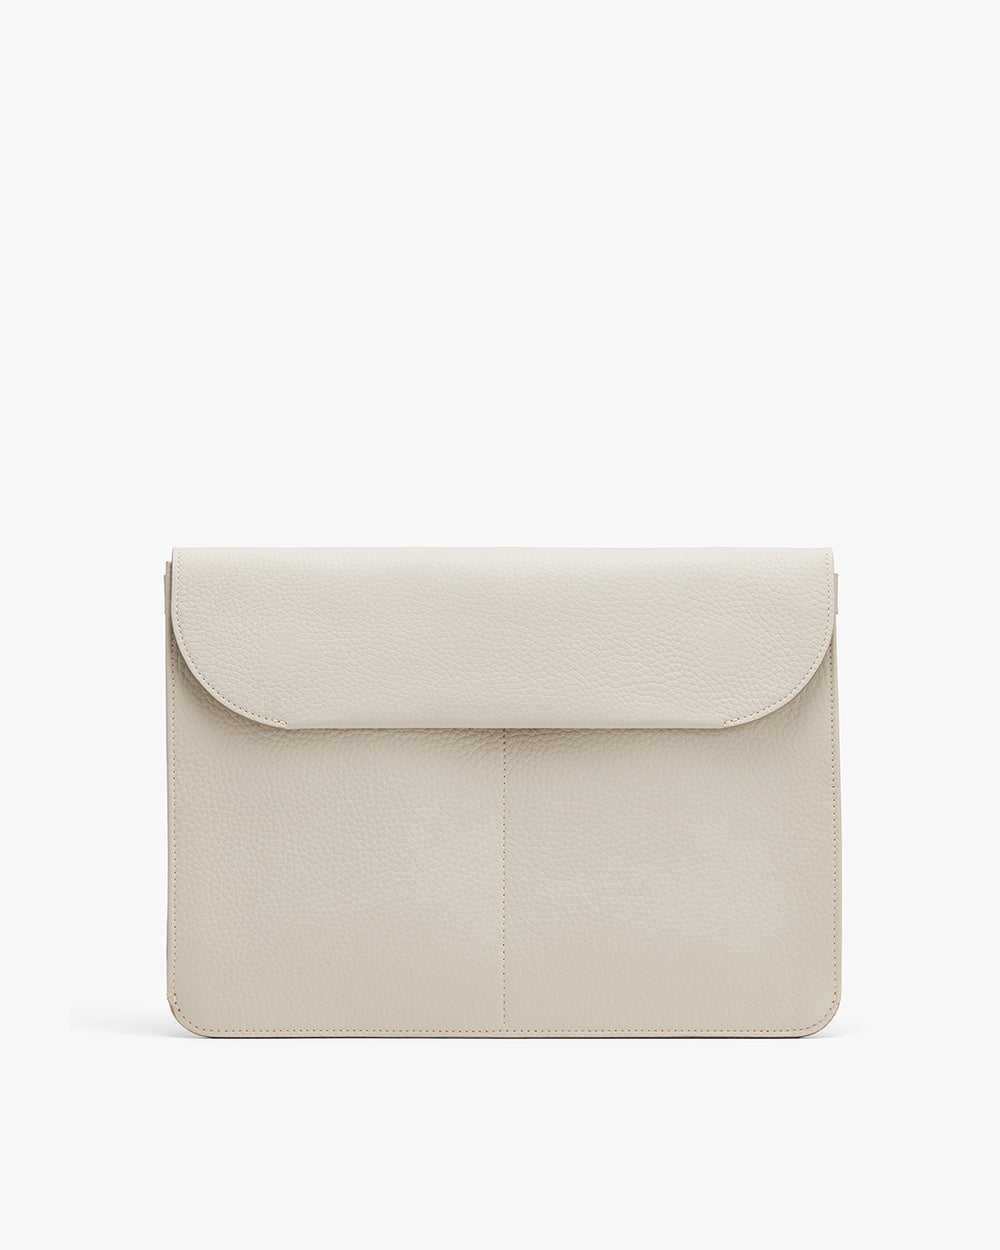 Closed flap bag on a plain background